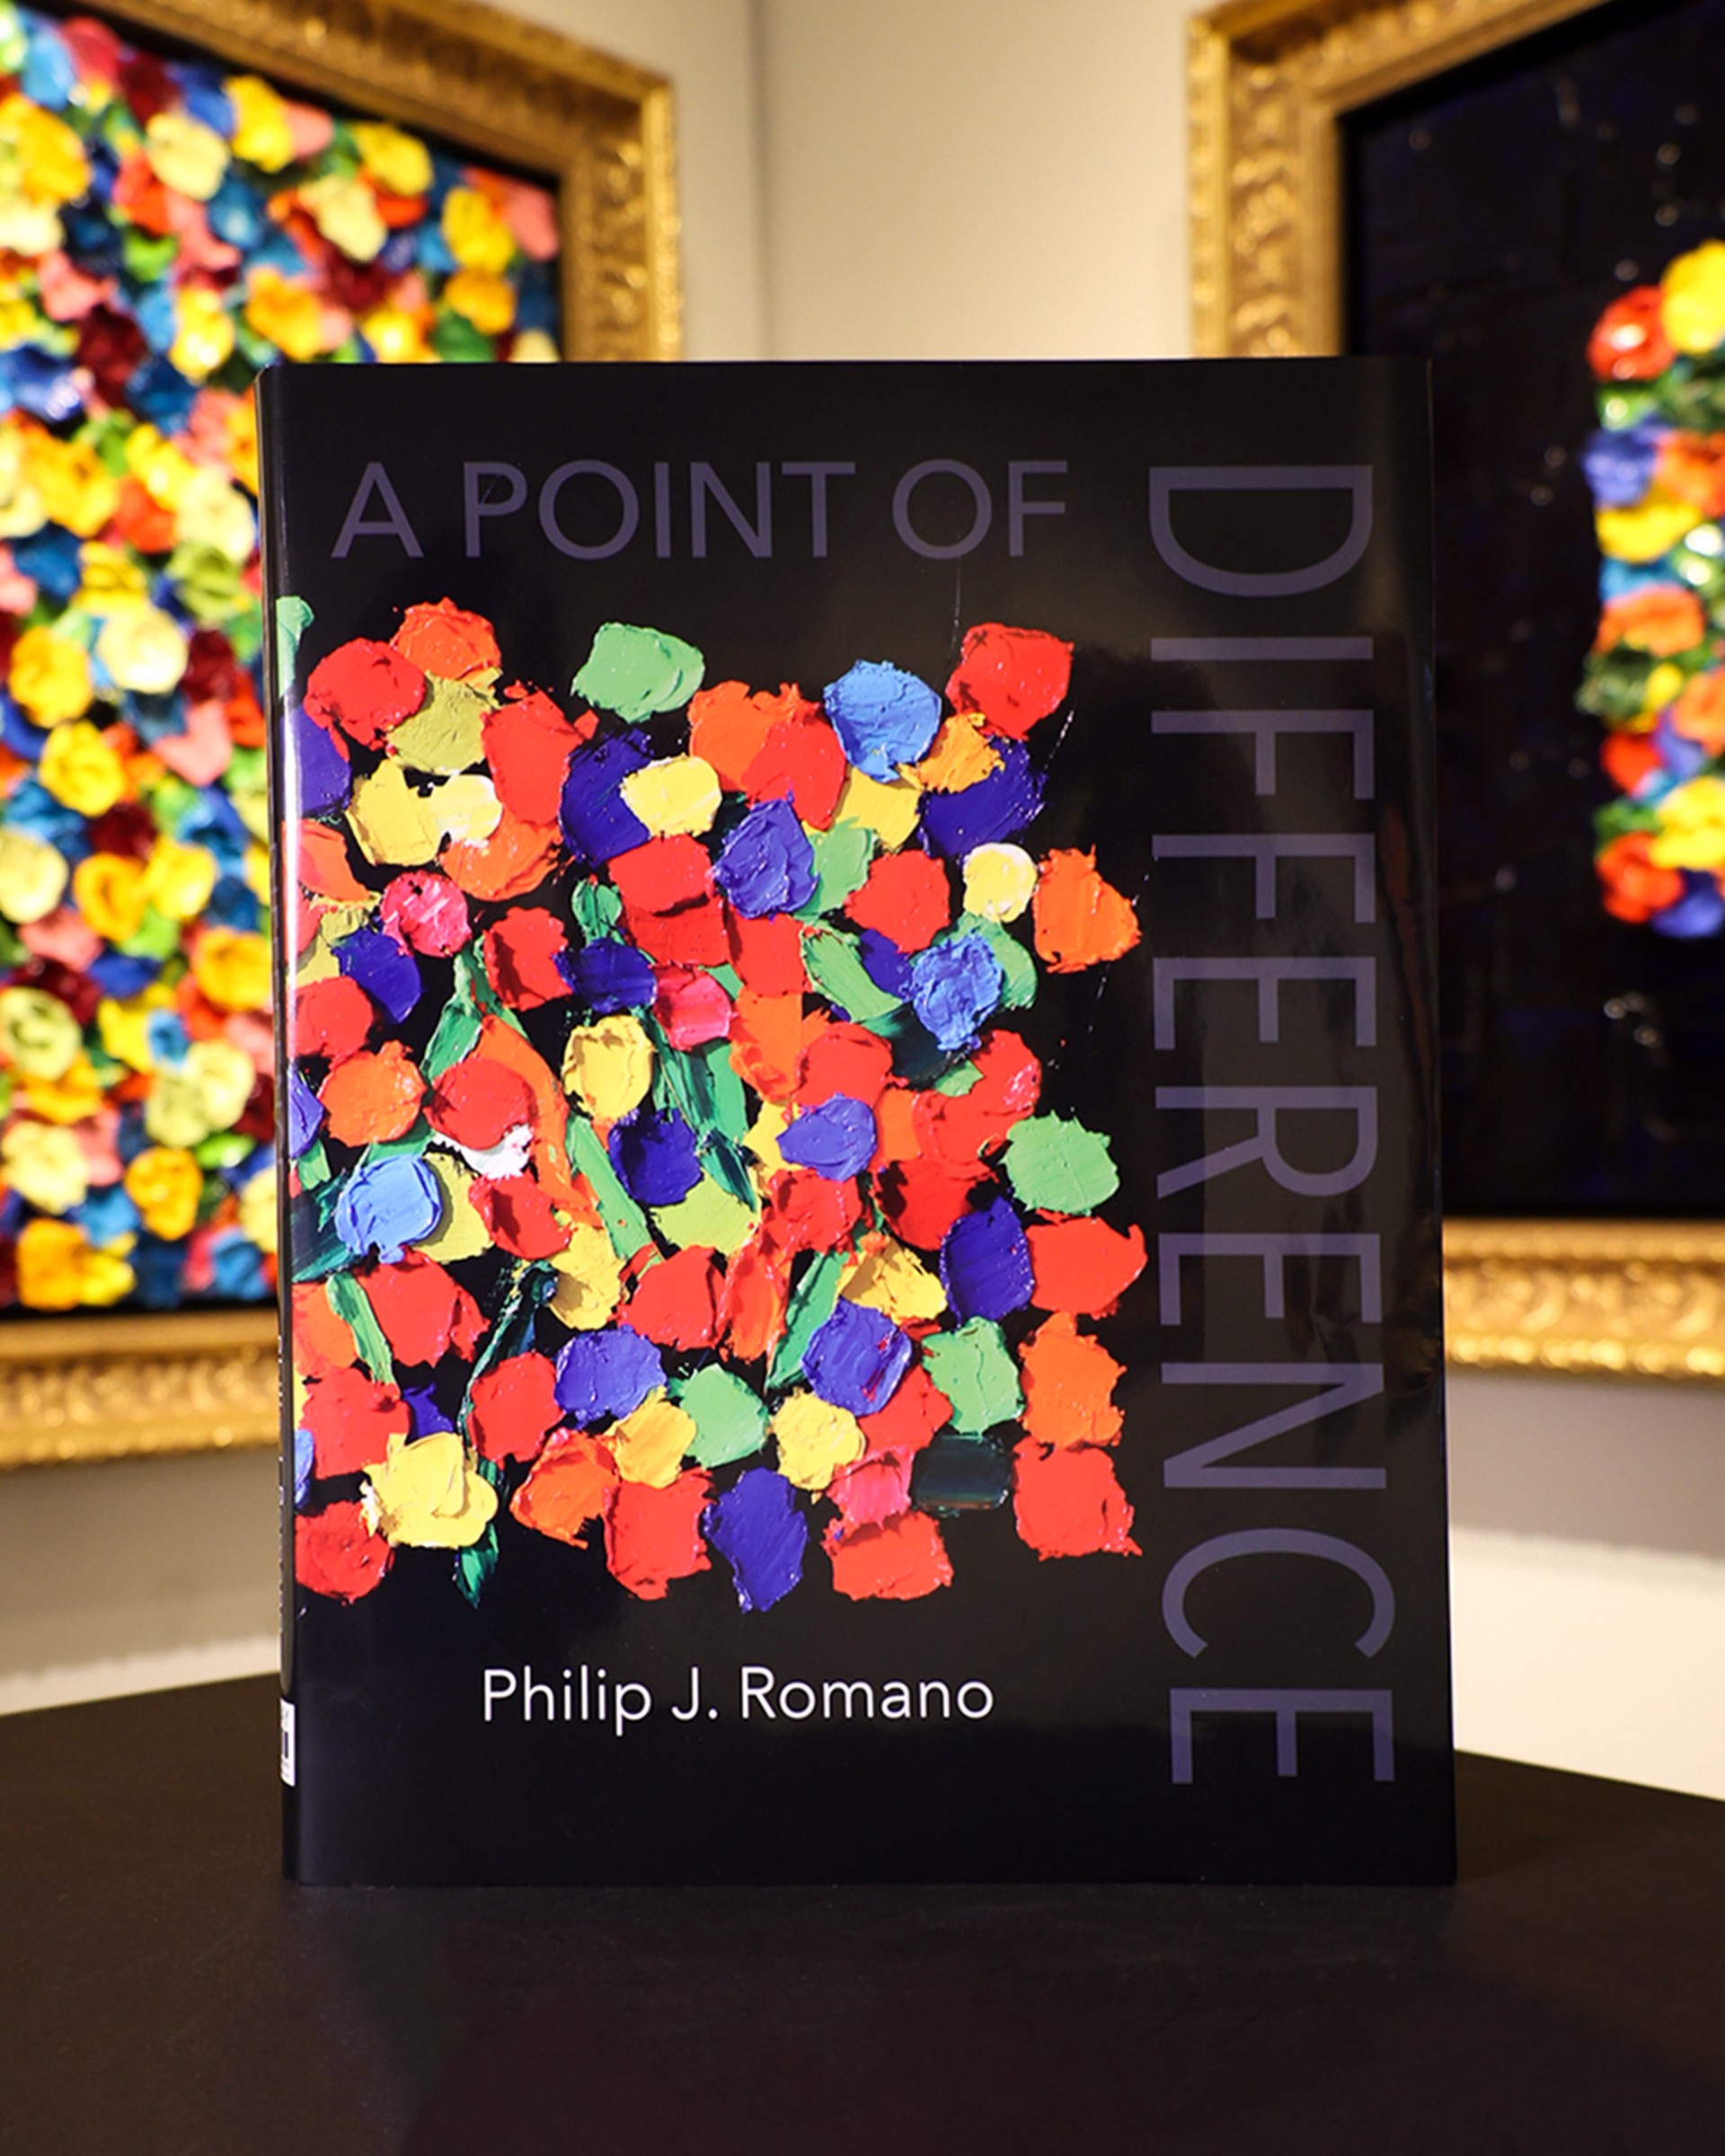 Philip Romano Book "A Point of Difference" by Philip J. Romano